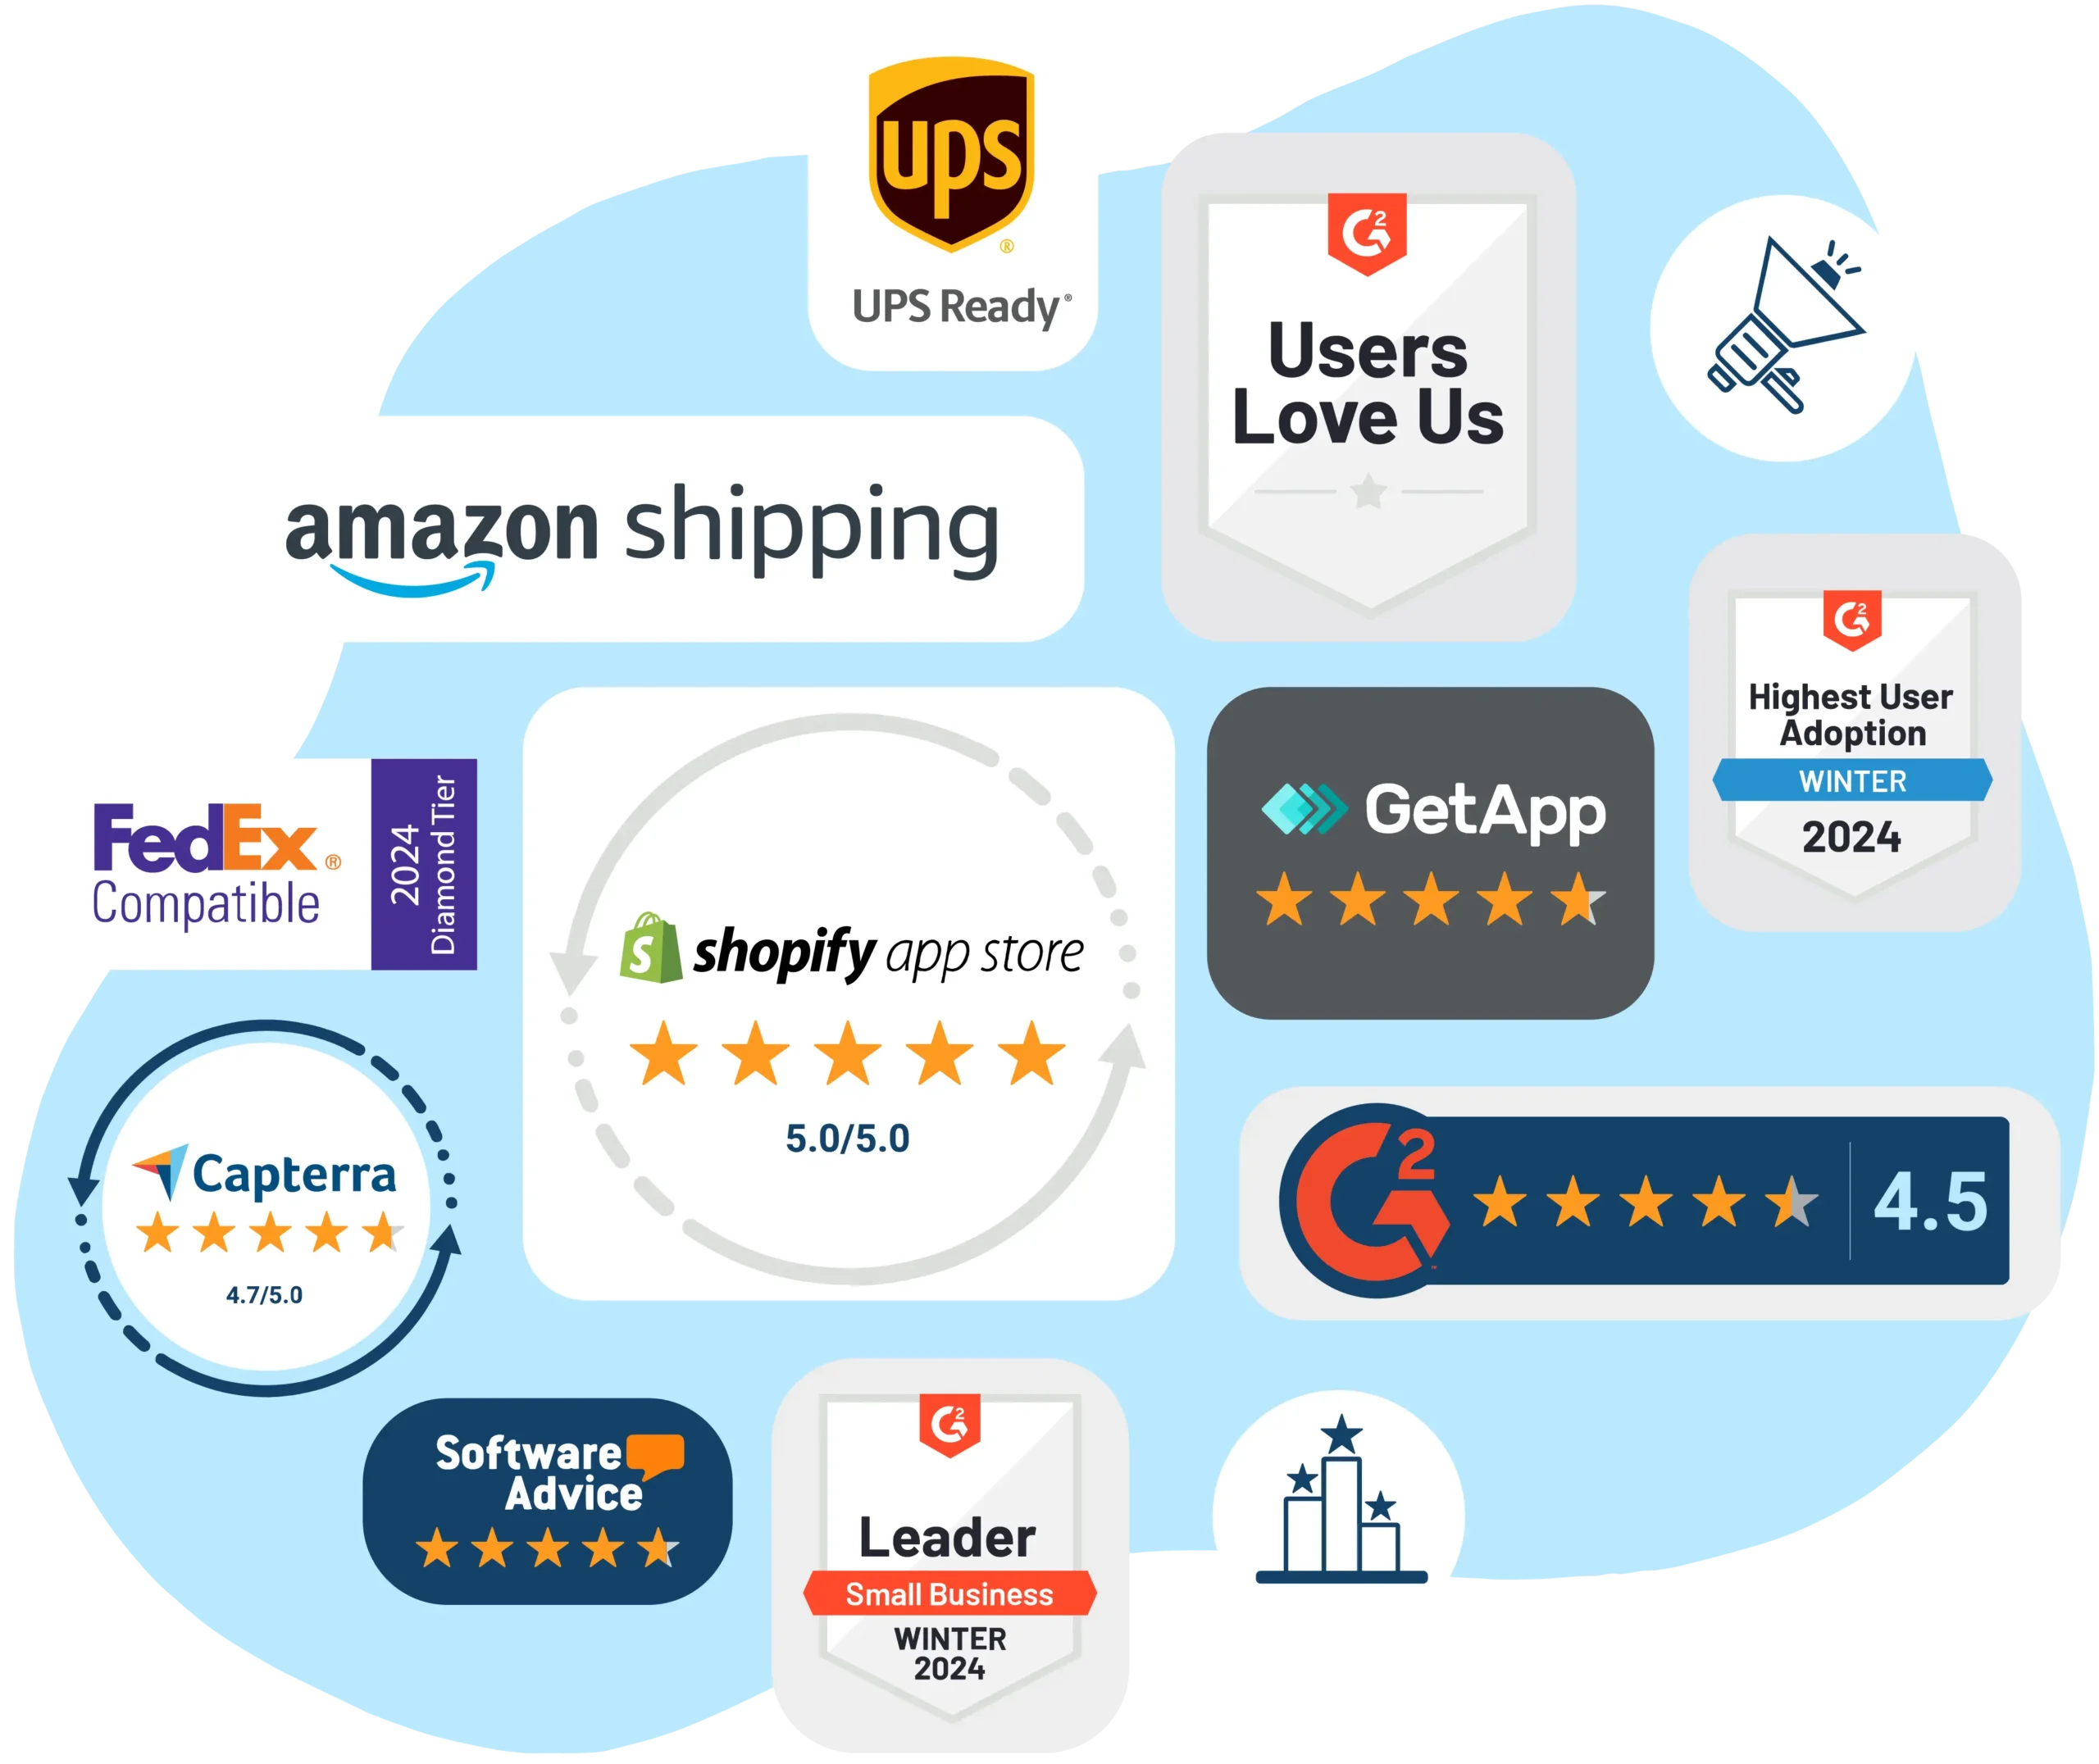 Descartes ShipRush reviews ratings from G2, Capterra, Shopify App Store, GetApp, and Software Advice plus UPS Ready badge, FedEx Diamond Partner badge, G2 small business leader badge, and amazon shipping logo